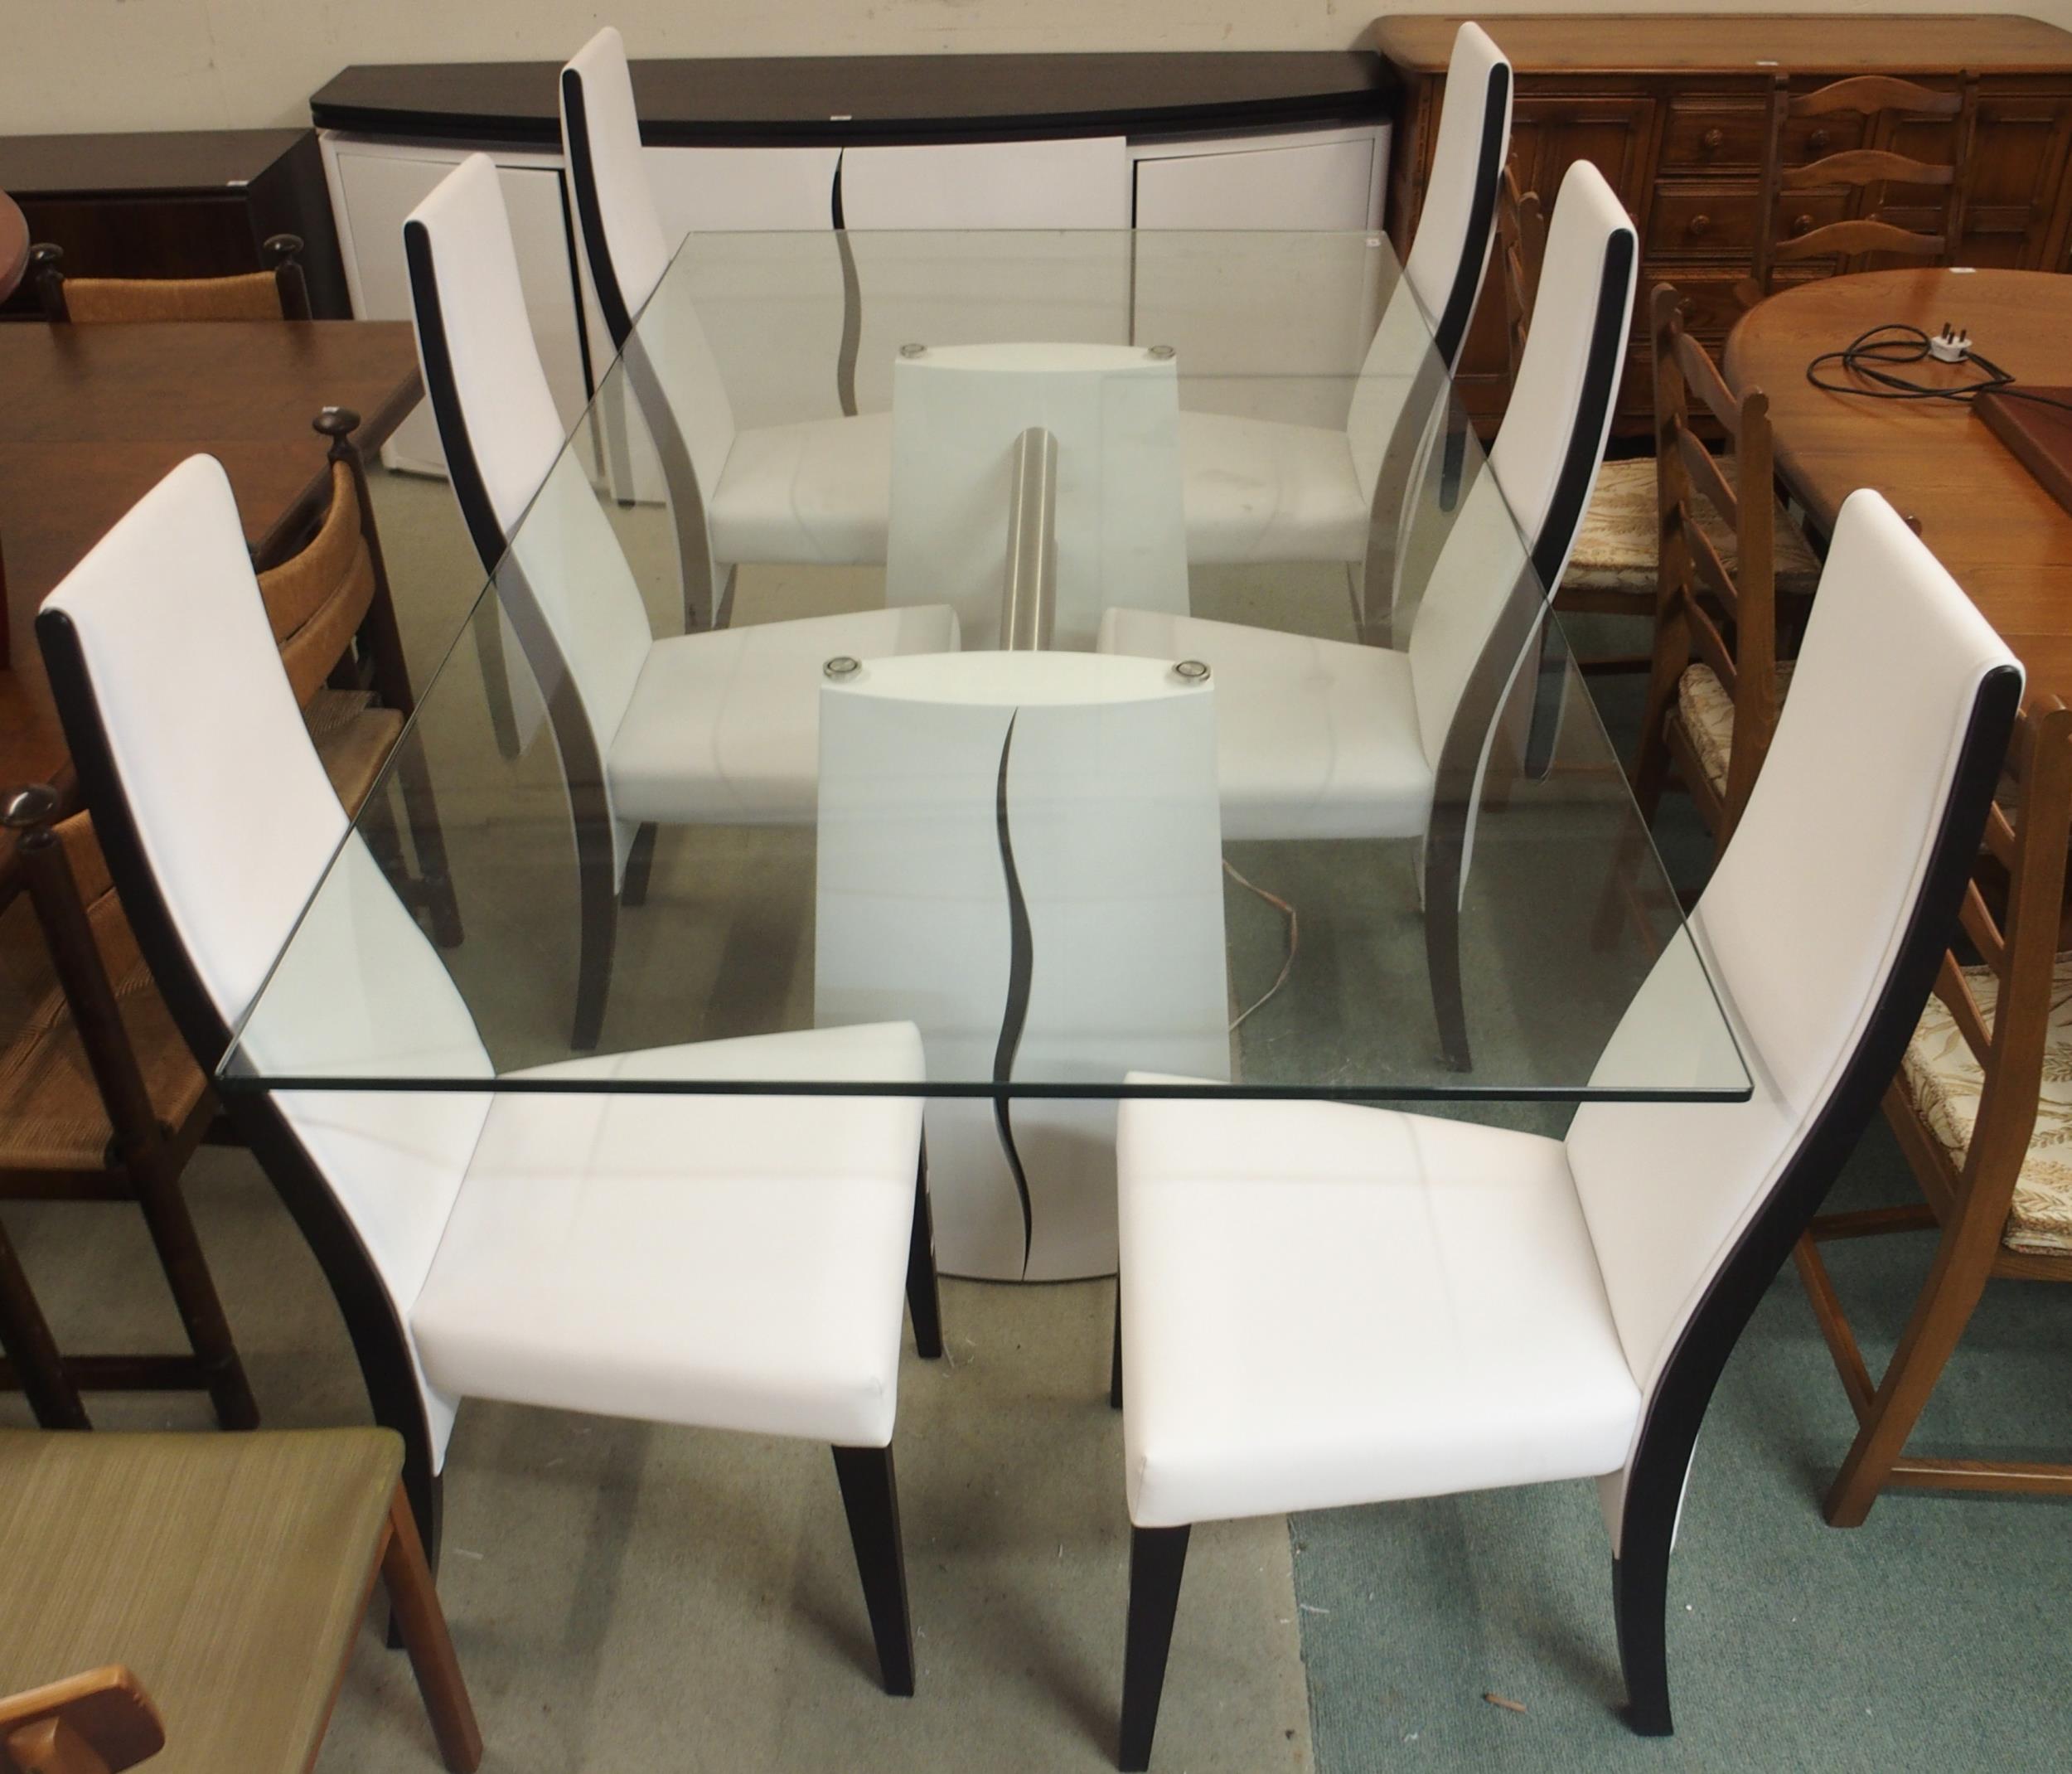 A contemporary Aleal glass top dining table, 78cm high x 215cm long x 115cm wide and six white